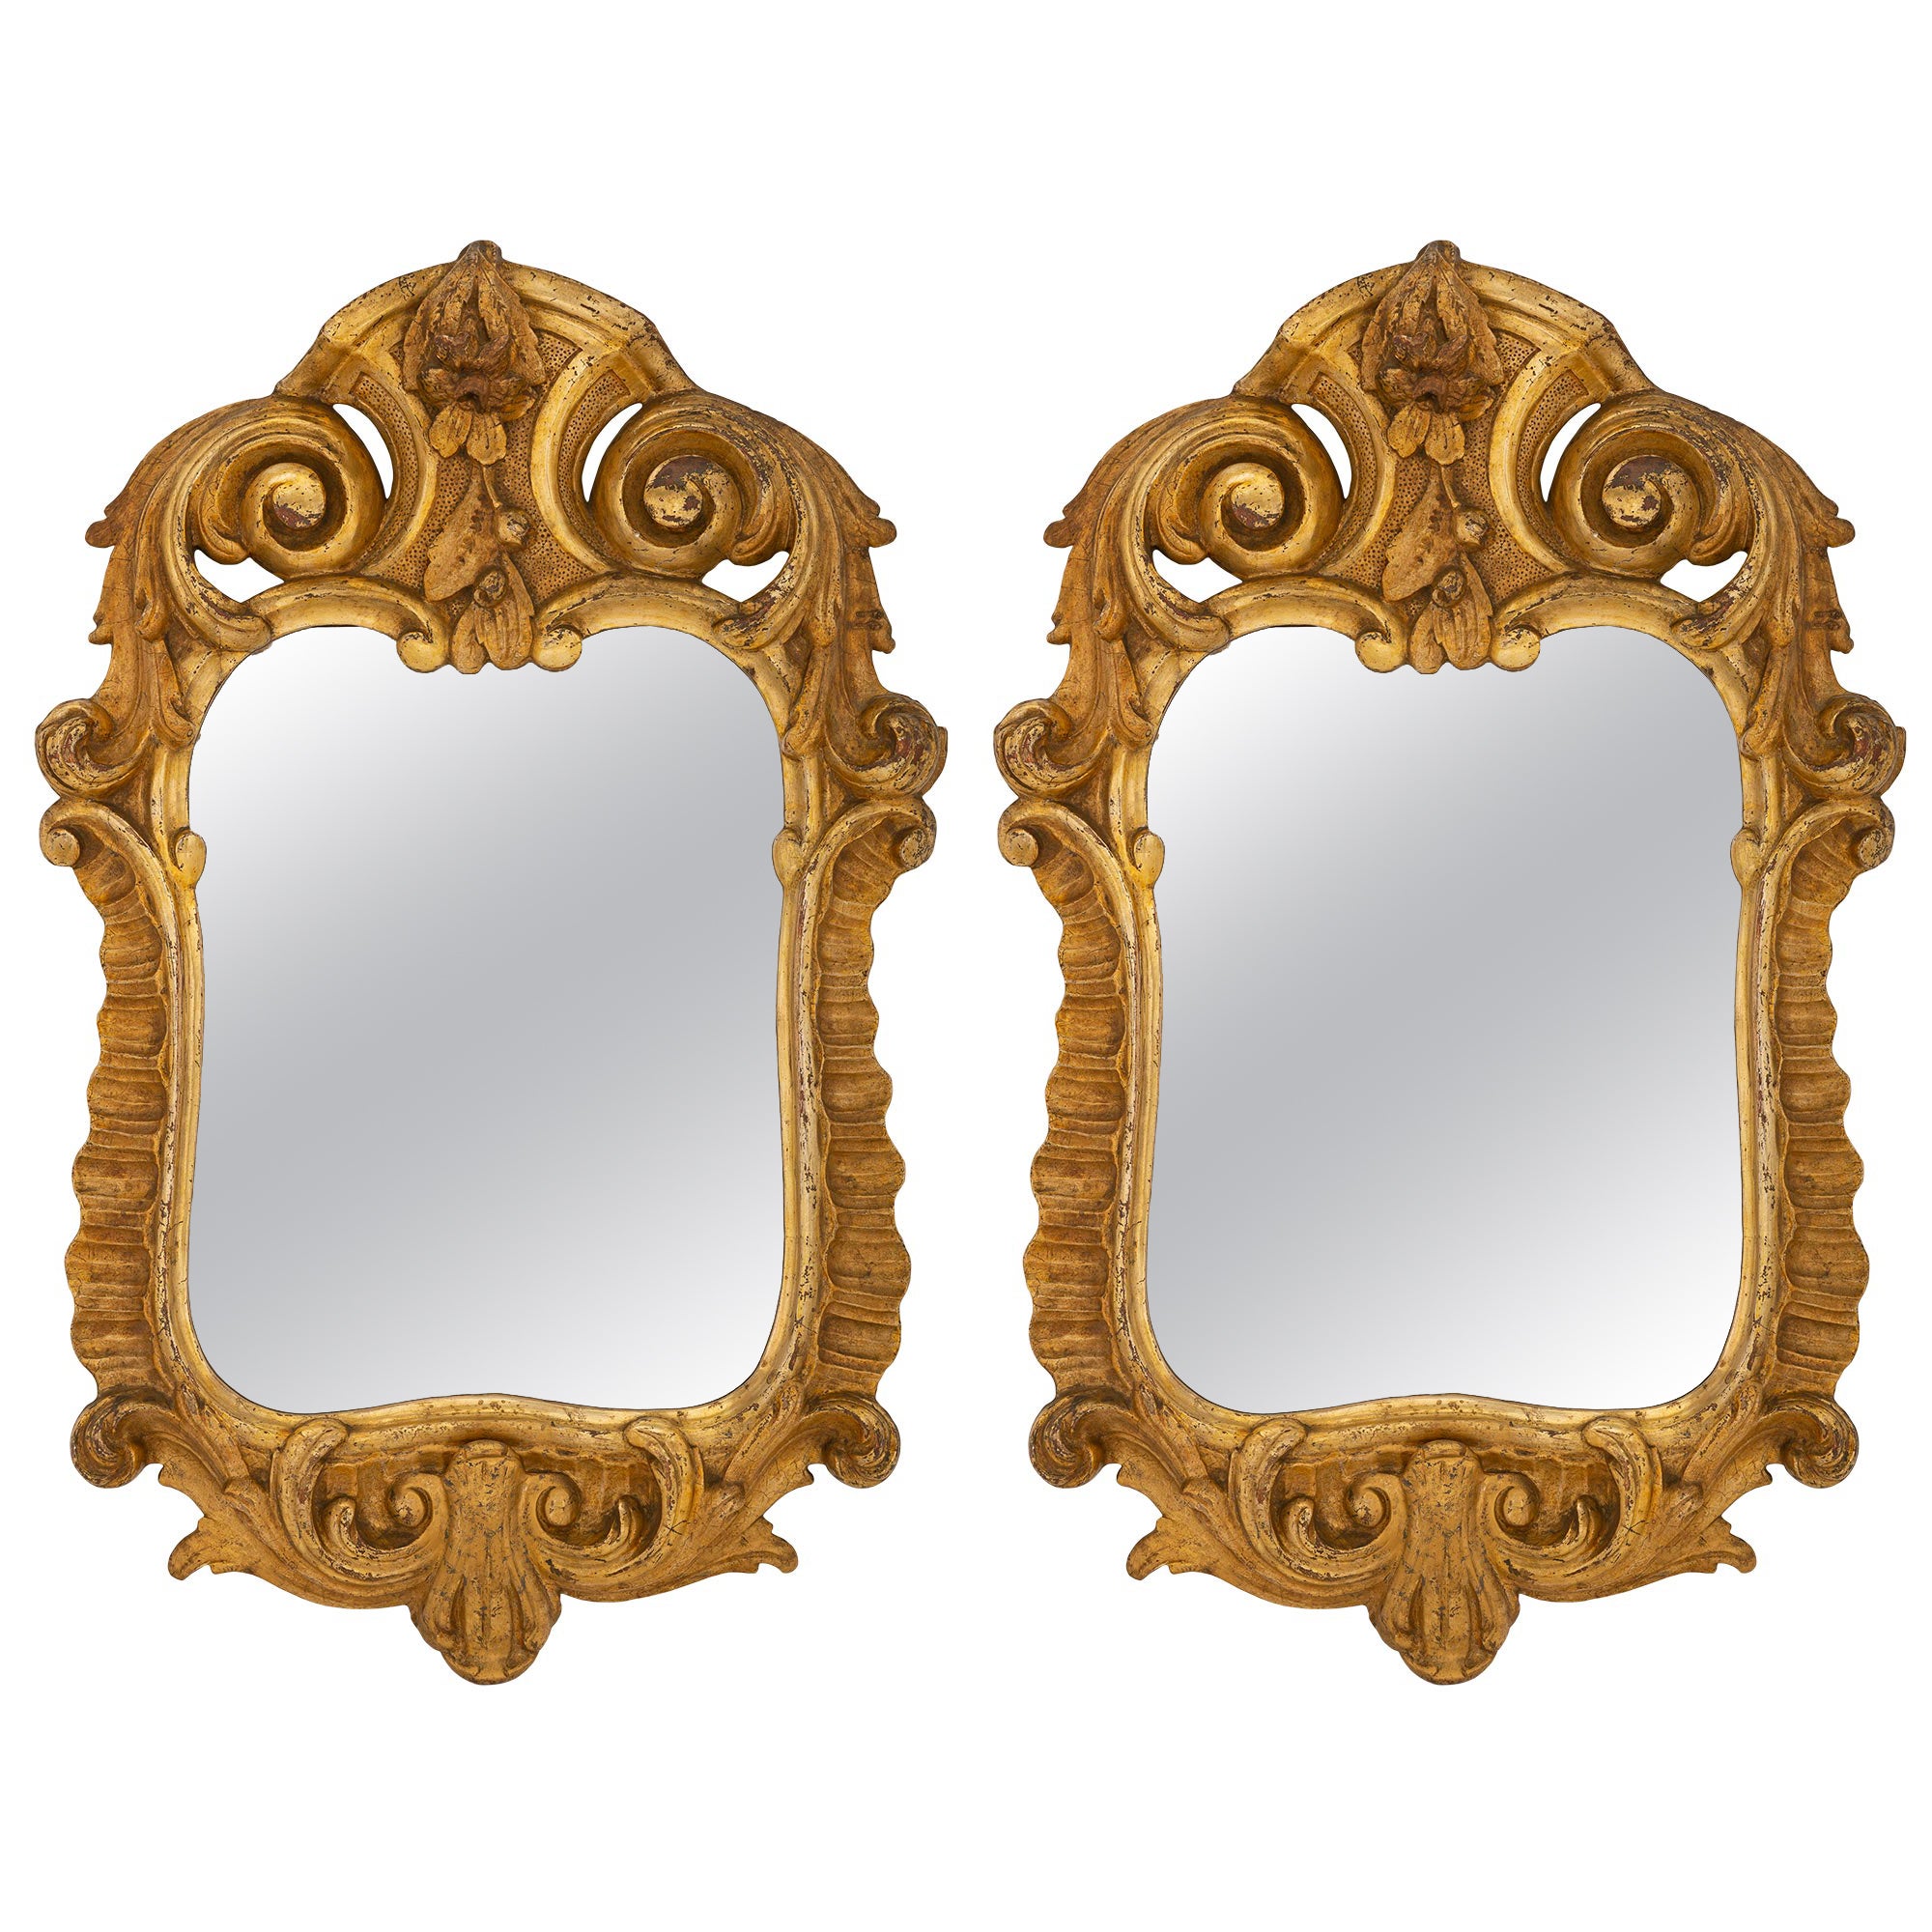 Pair of Italian 18th Century Mecca Mirrors with Original Mirror Plates For Sale